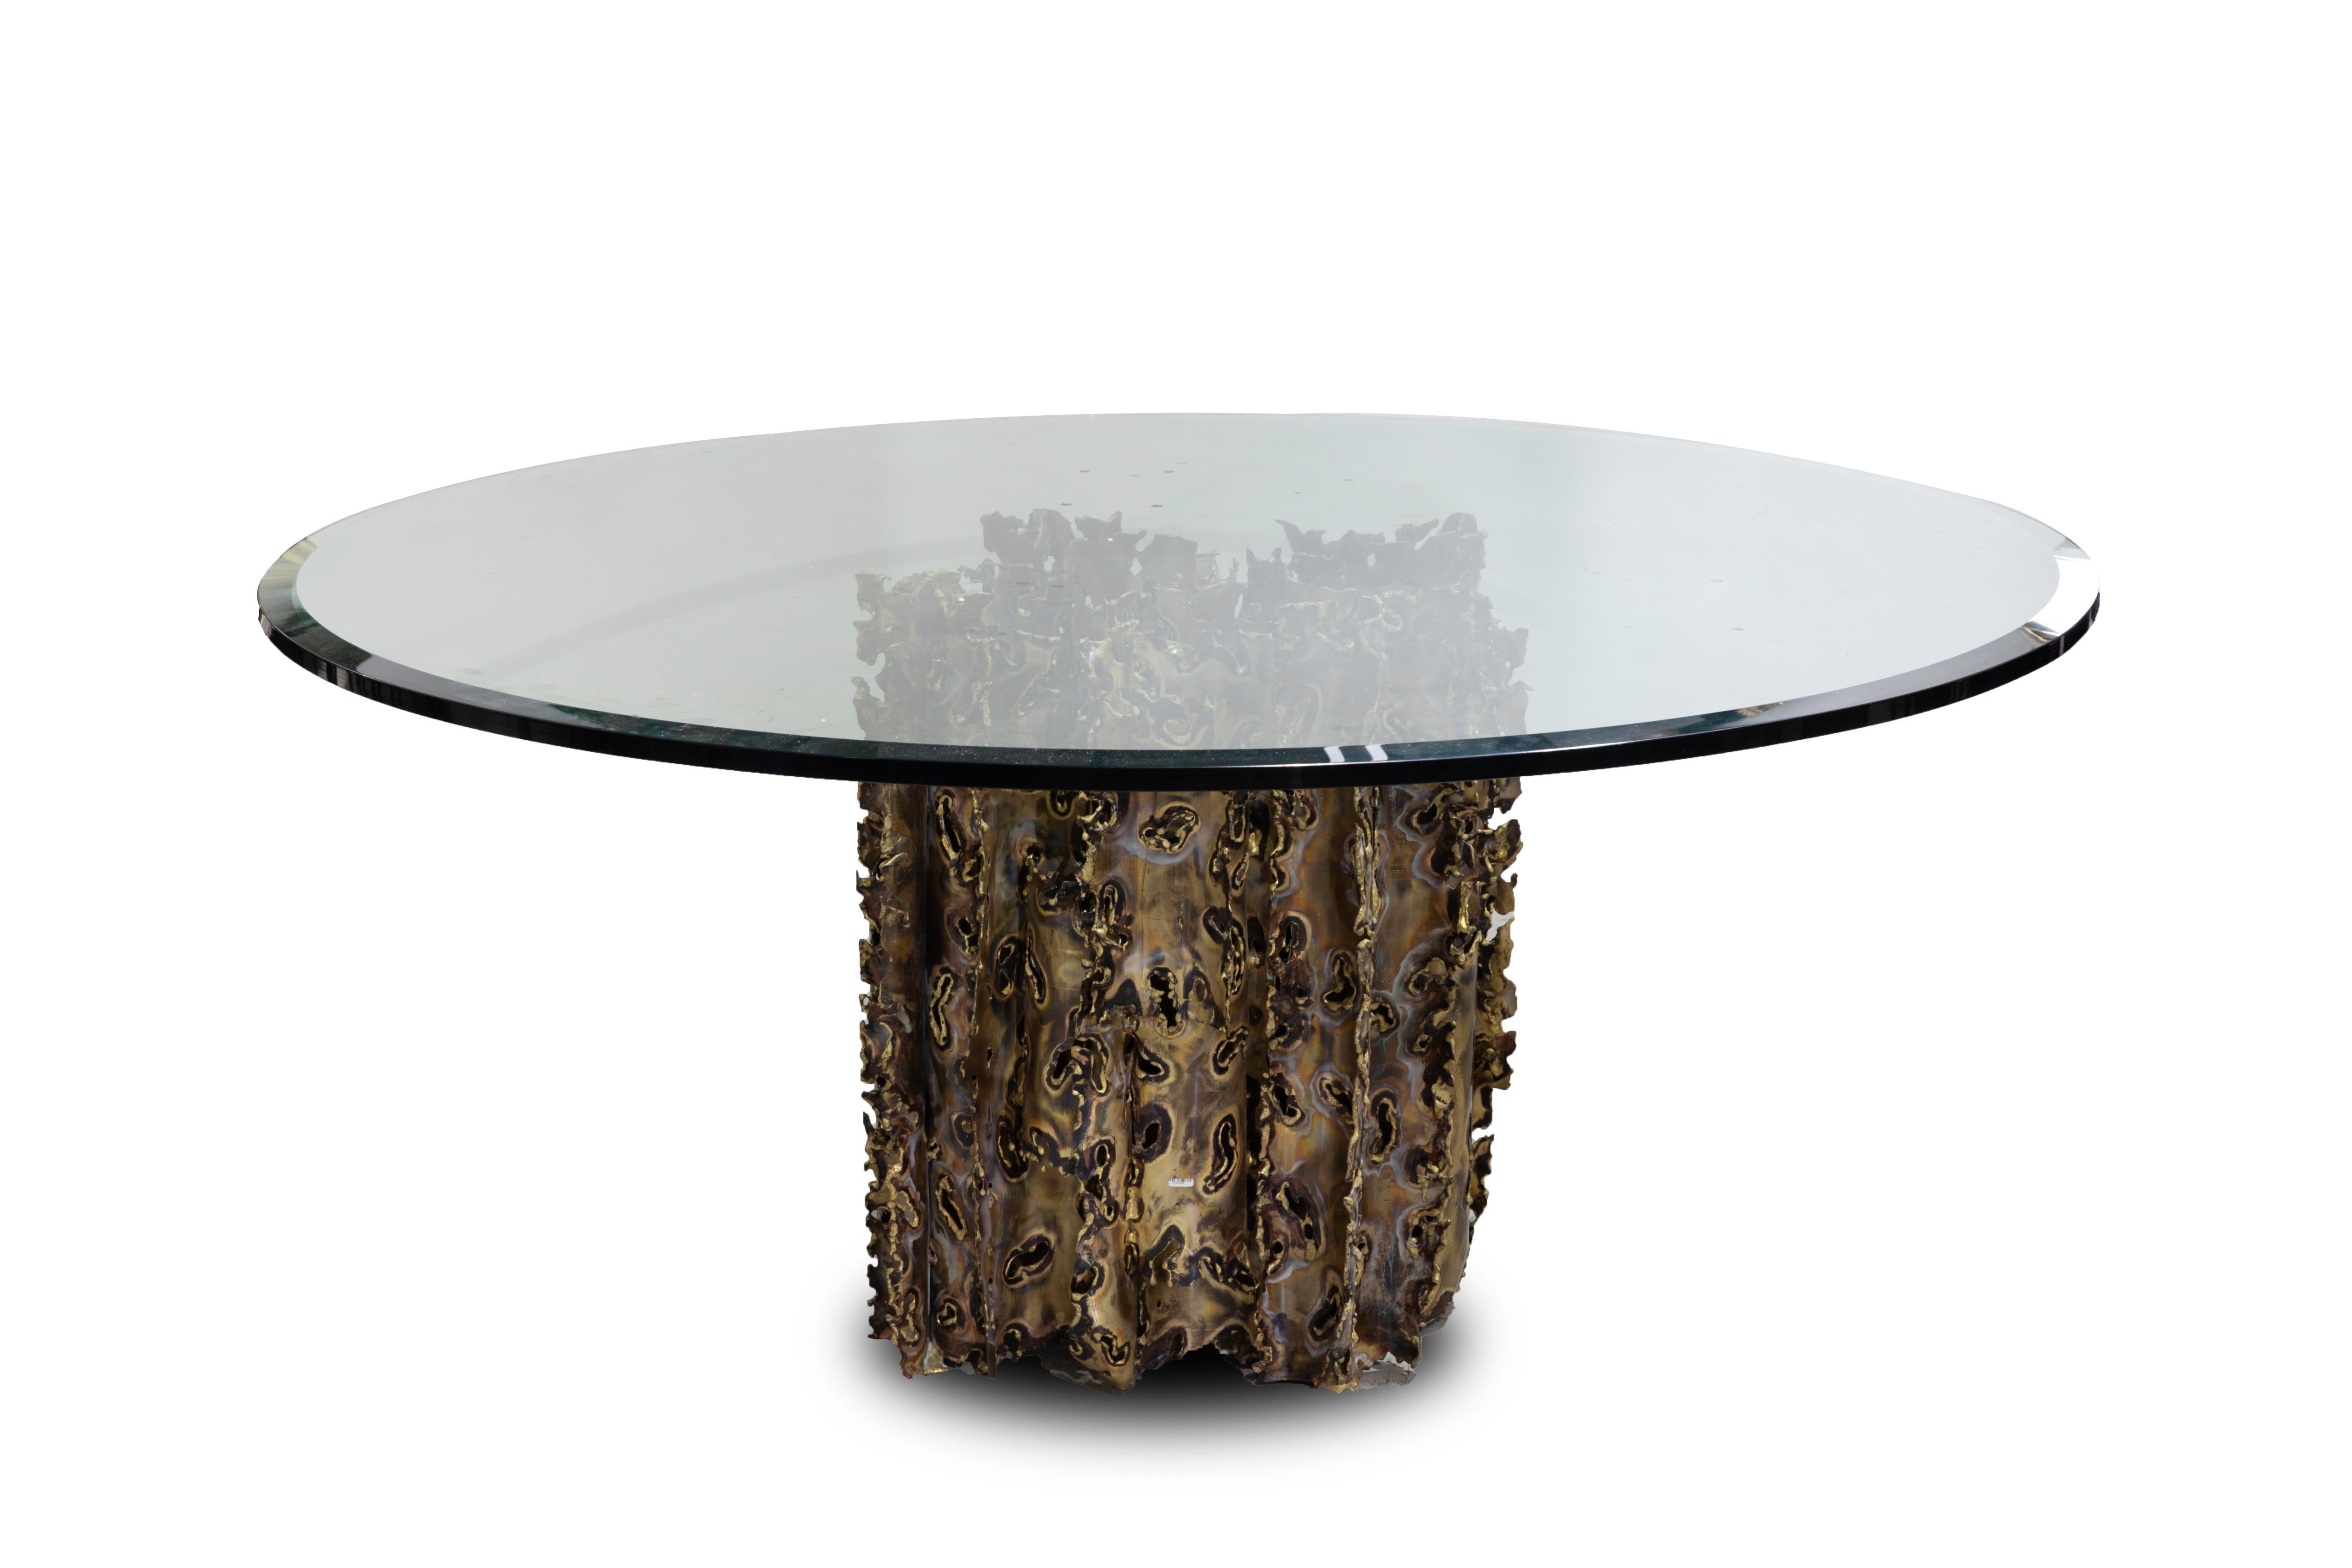 Silas Seandel - Cathedral series dining table. A Mid-Century Modern Brutalist style dining table by Silas Seandel with a clear, round beveled glass top and handcut, welded and acid etched bronze base, USA, 1970s. Approx 25